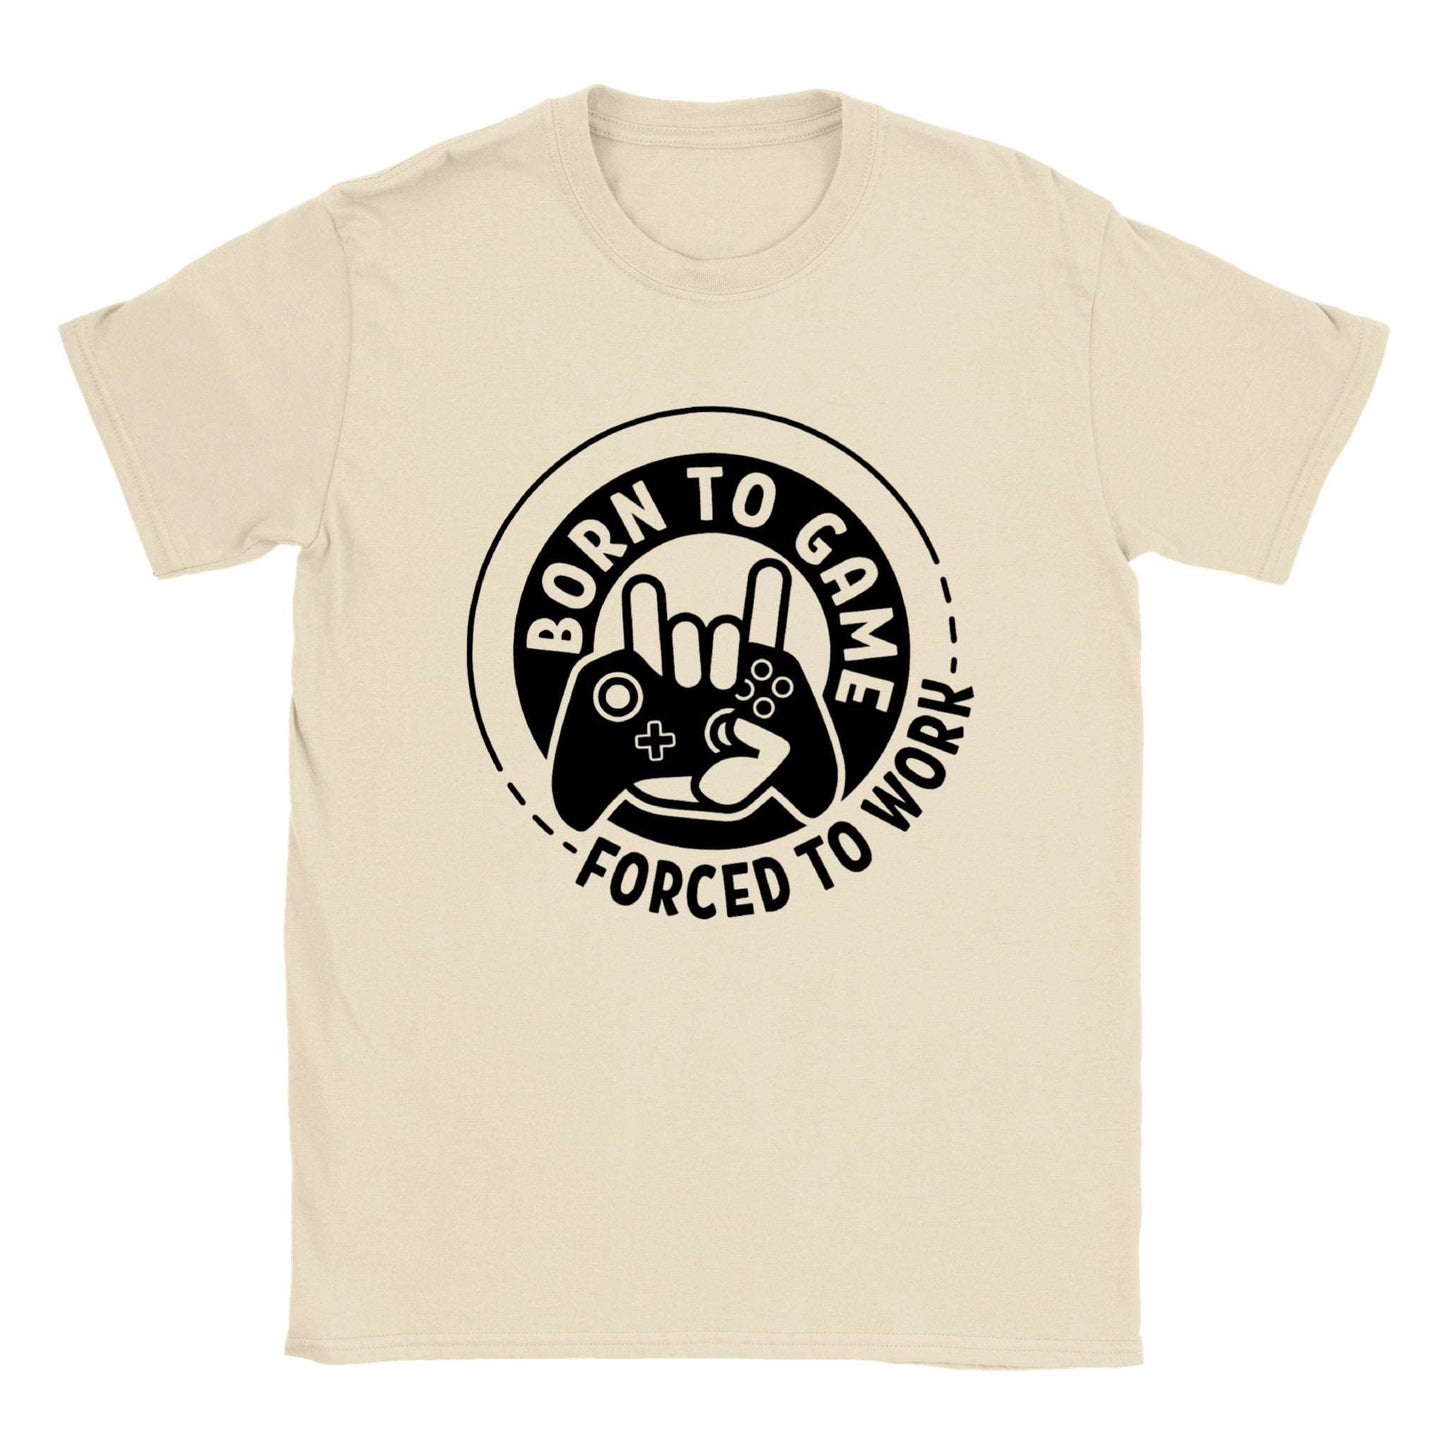 Born to Game Forced to Work - Crewneck T-shirt - Mister Snarky's